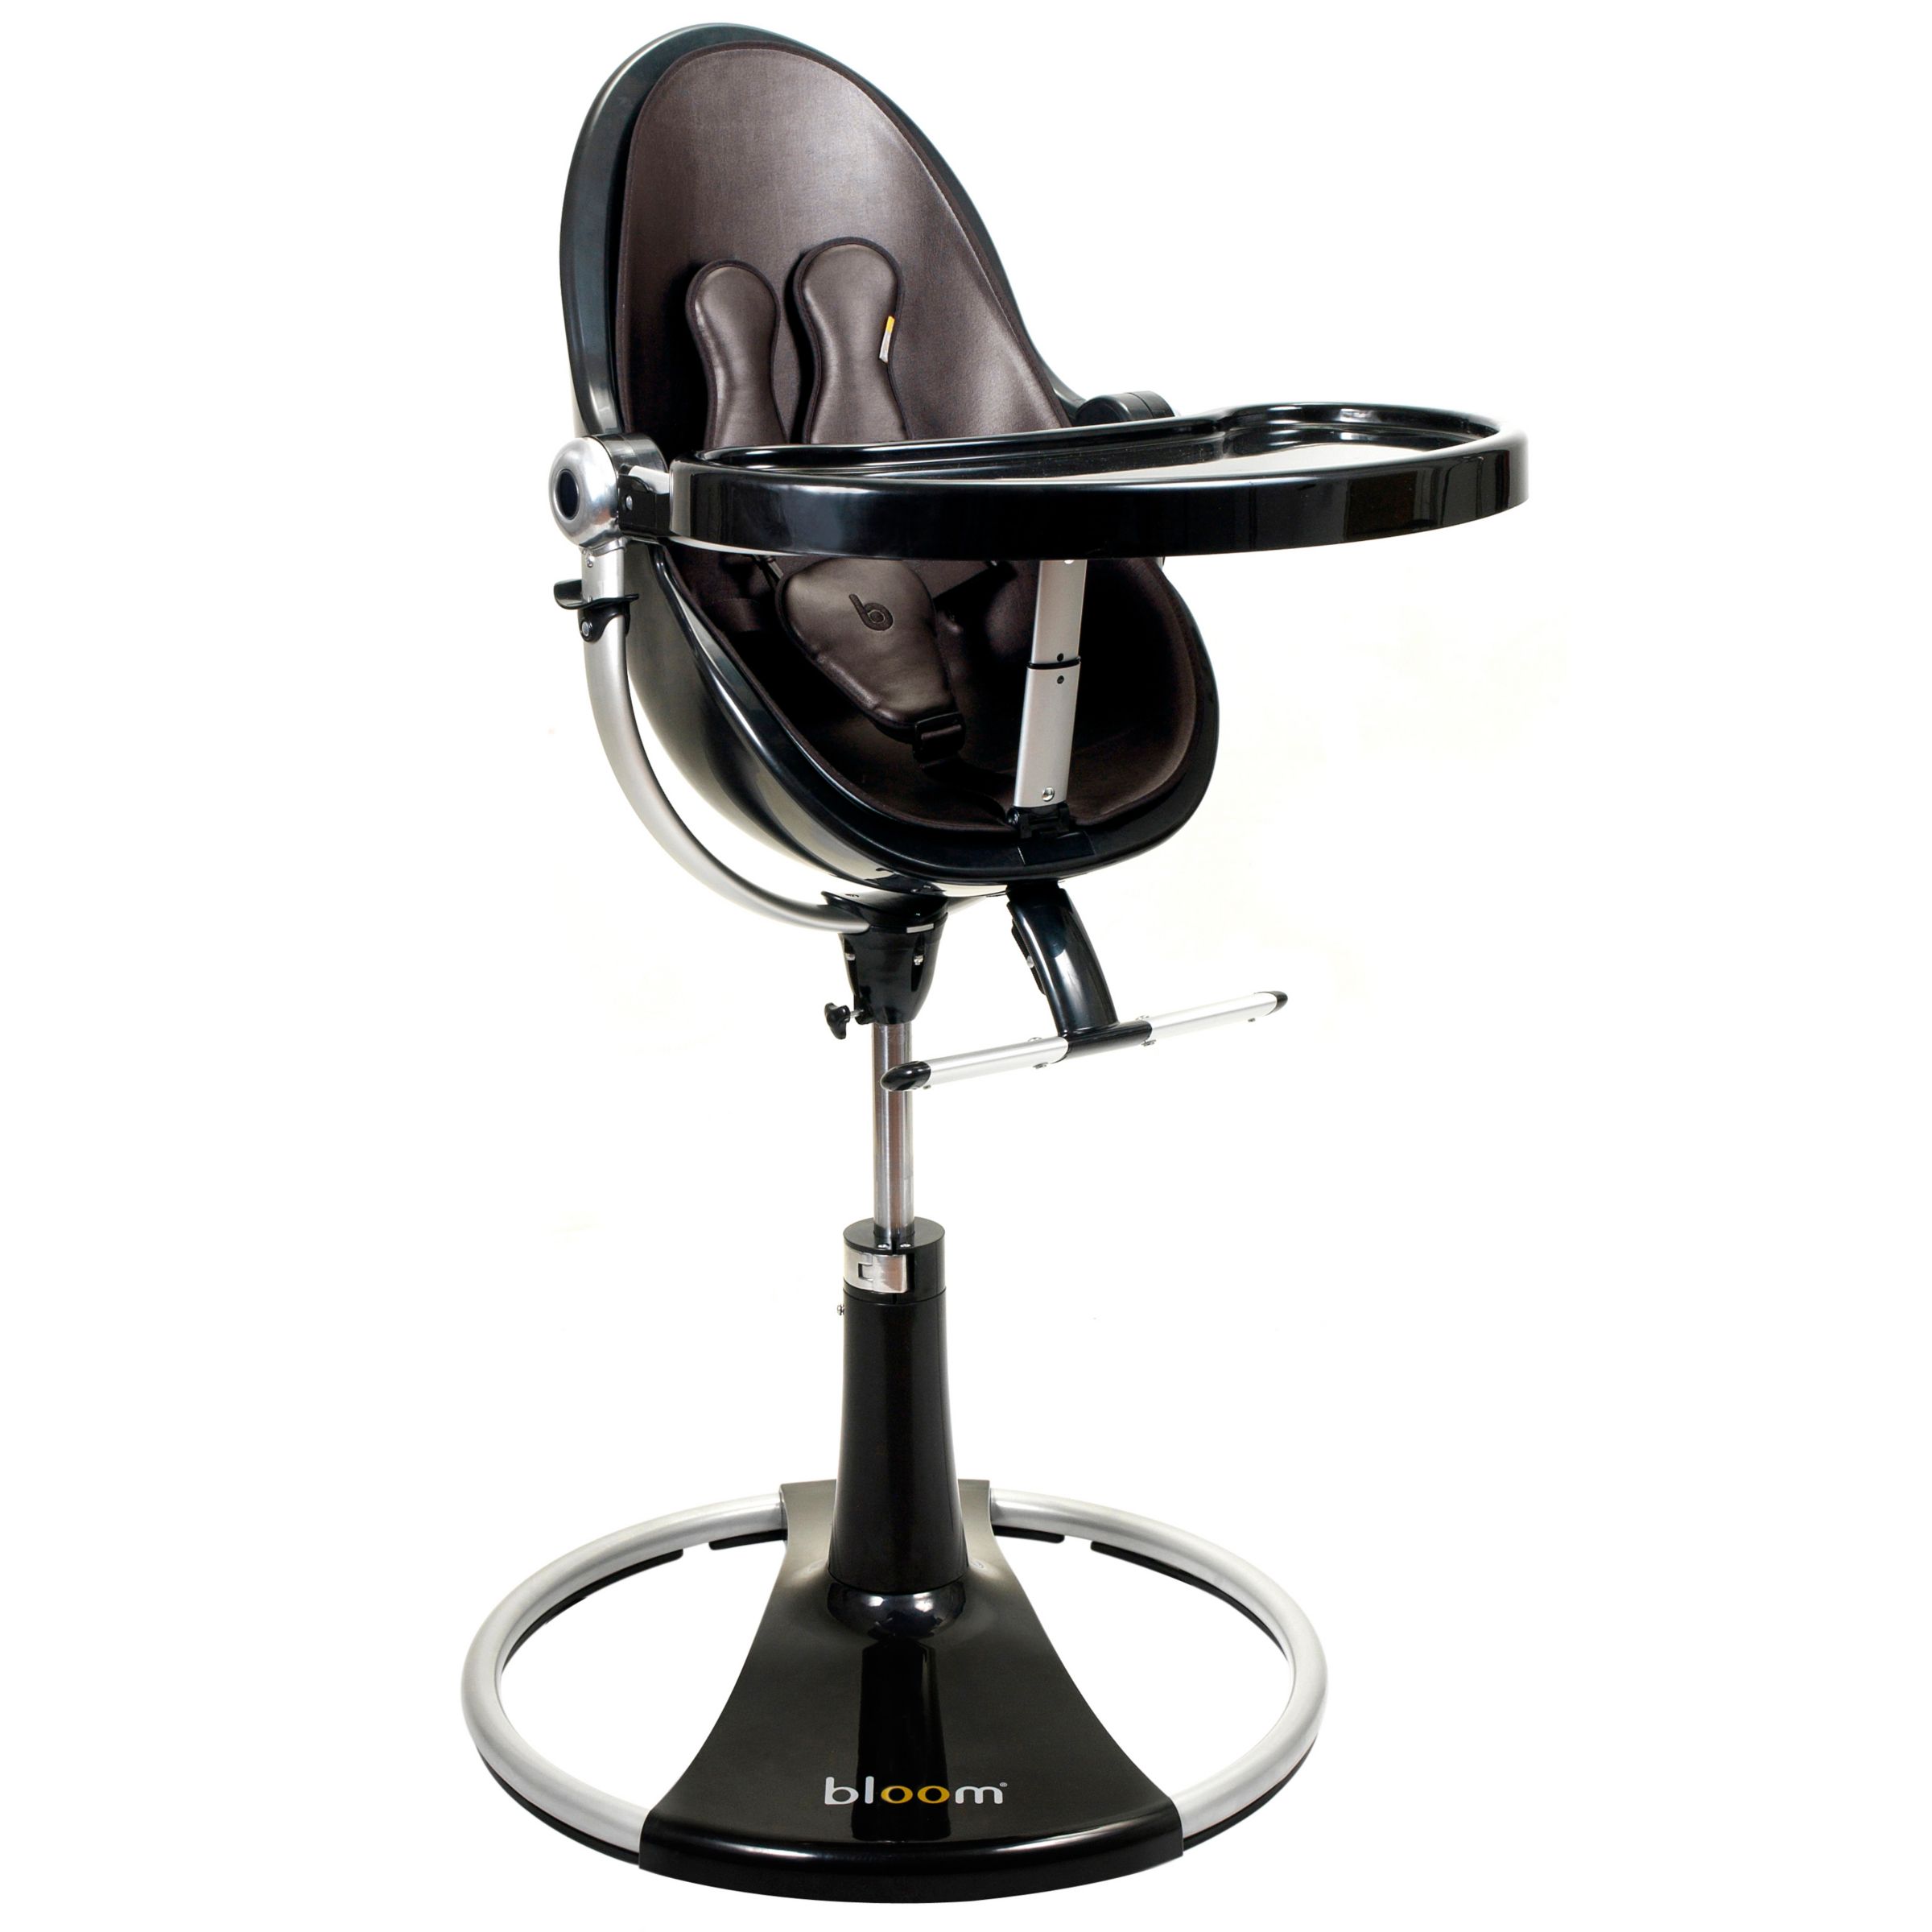 bloom Fresco Loft Contemporary Leatherette Baby Chair, Ebony Black with Henna Brown at John Lewis